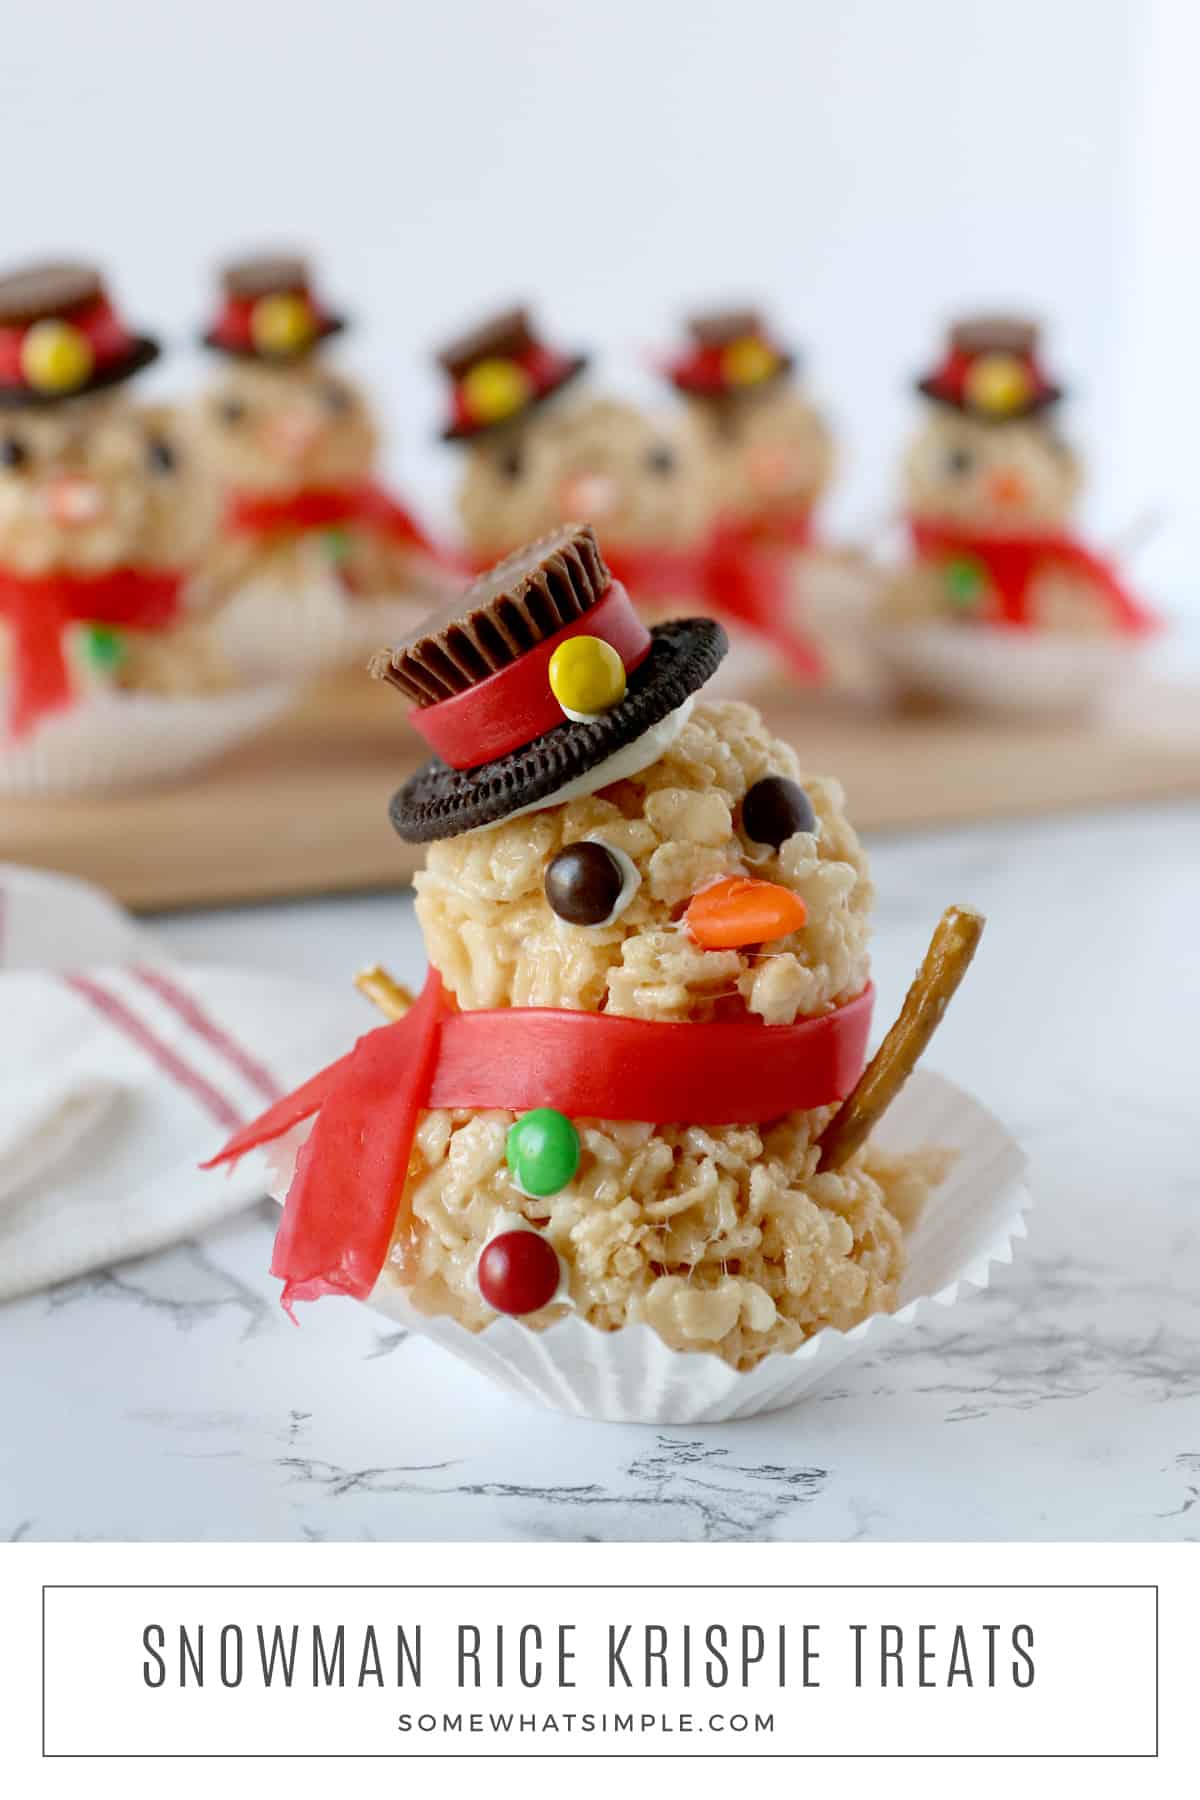 Snowman Rice Krispie treats are a fun holiday activity for kids that doubles as a tasty treat! These easy snowman treats are made with delicious peanut butter cups, M&M's, and other delicious candies that everyone is sure to love! via @somewhatsimple